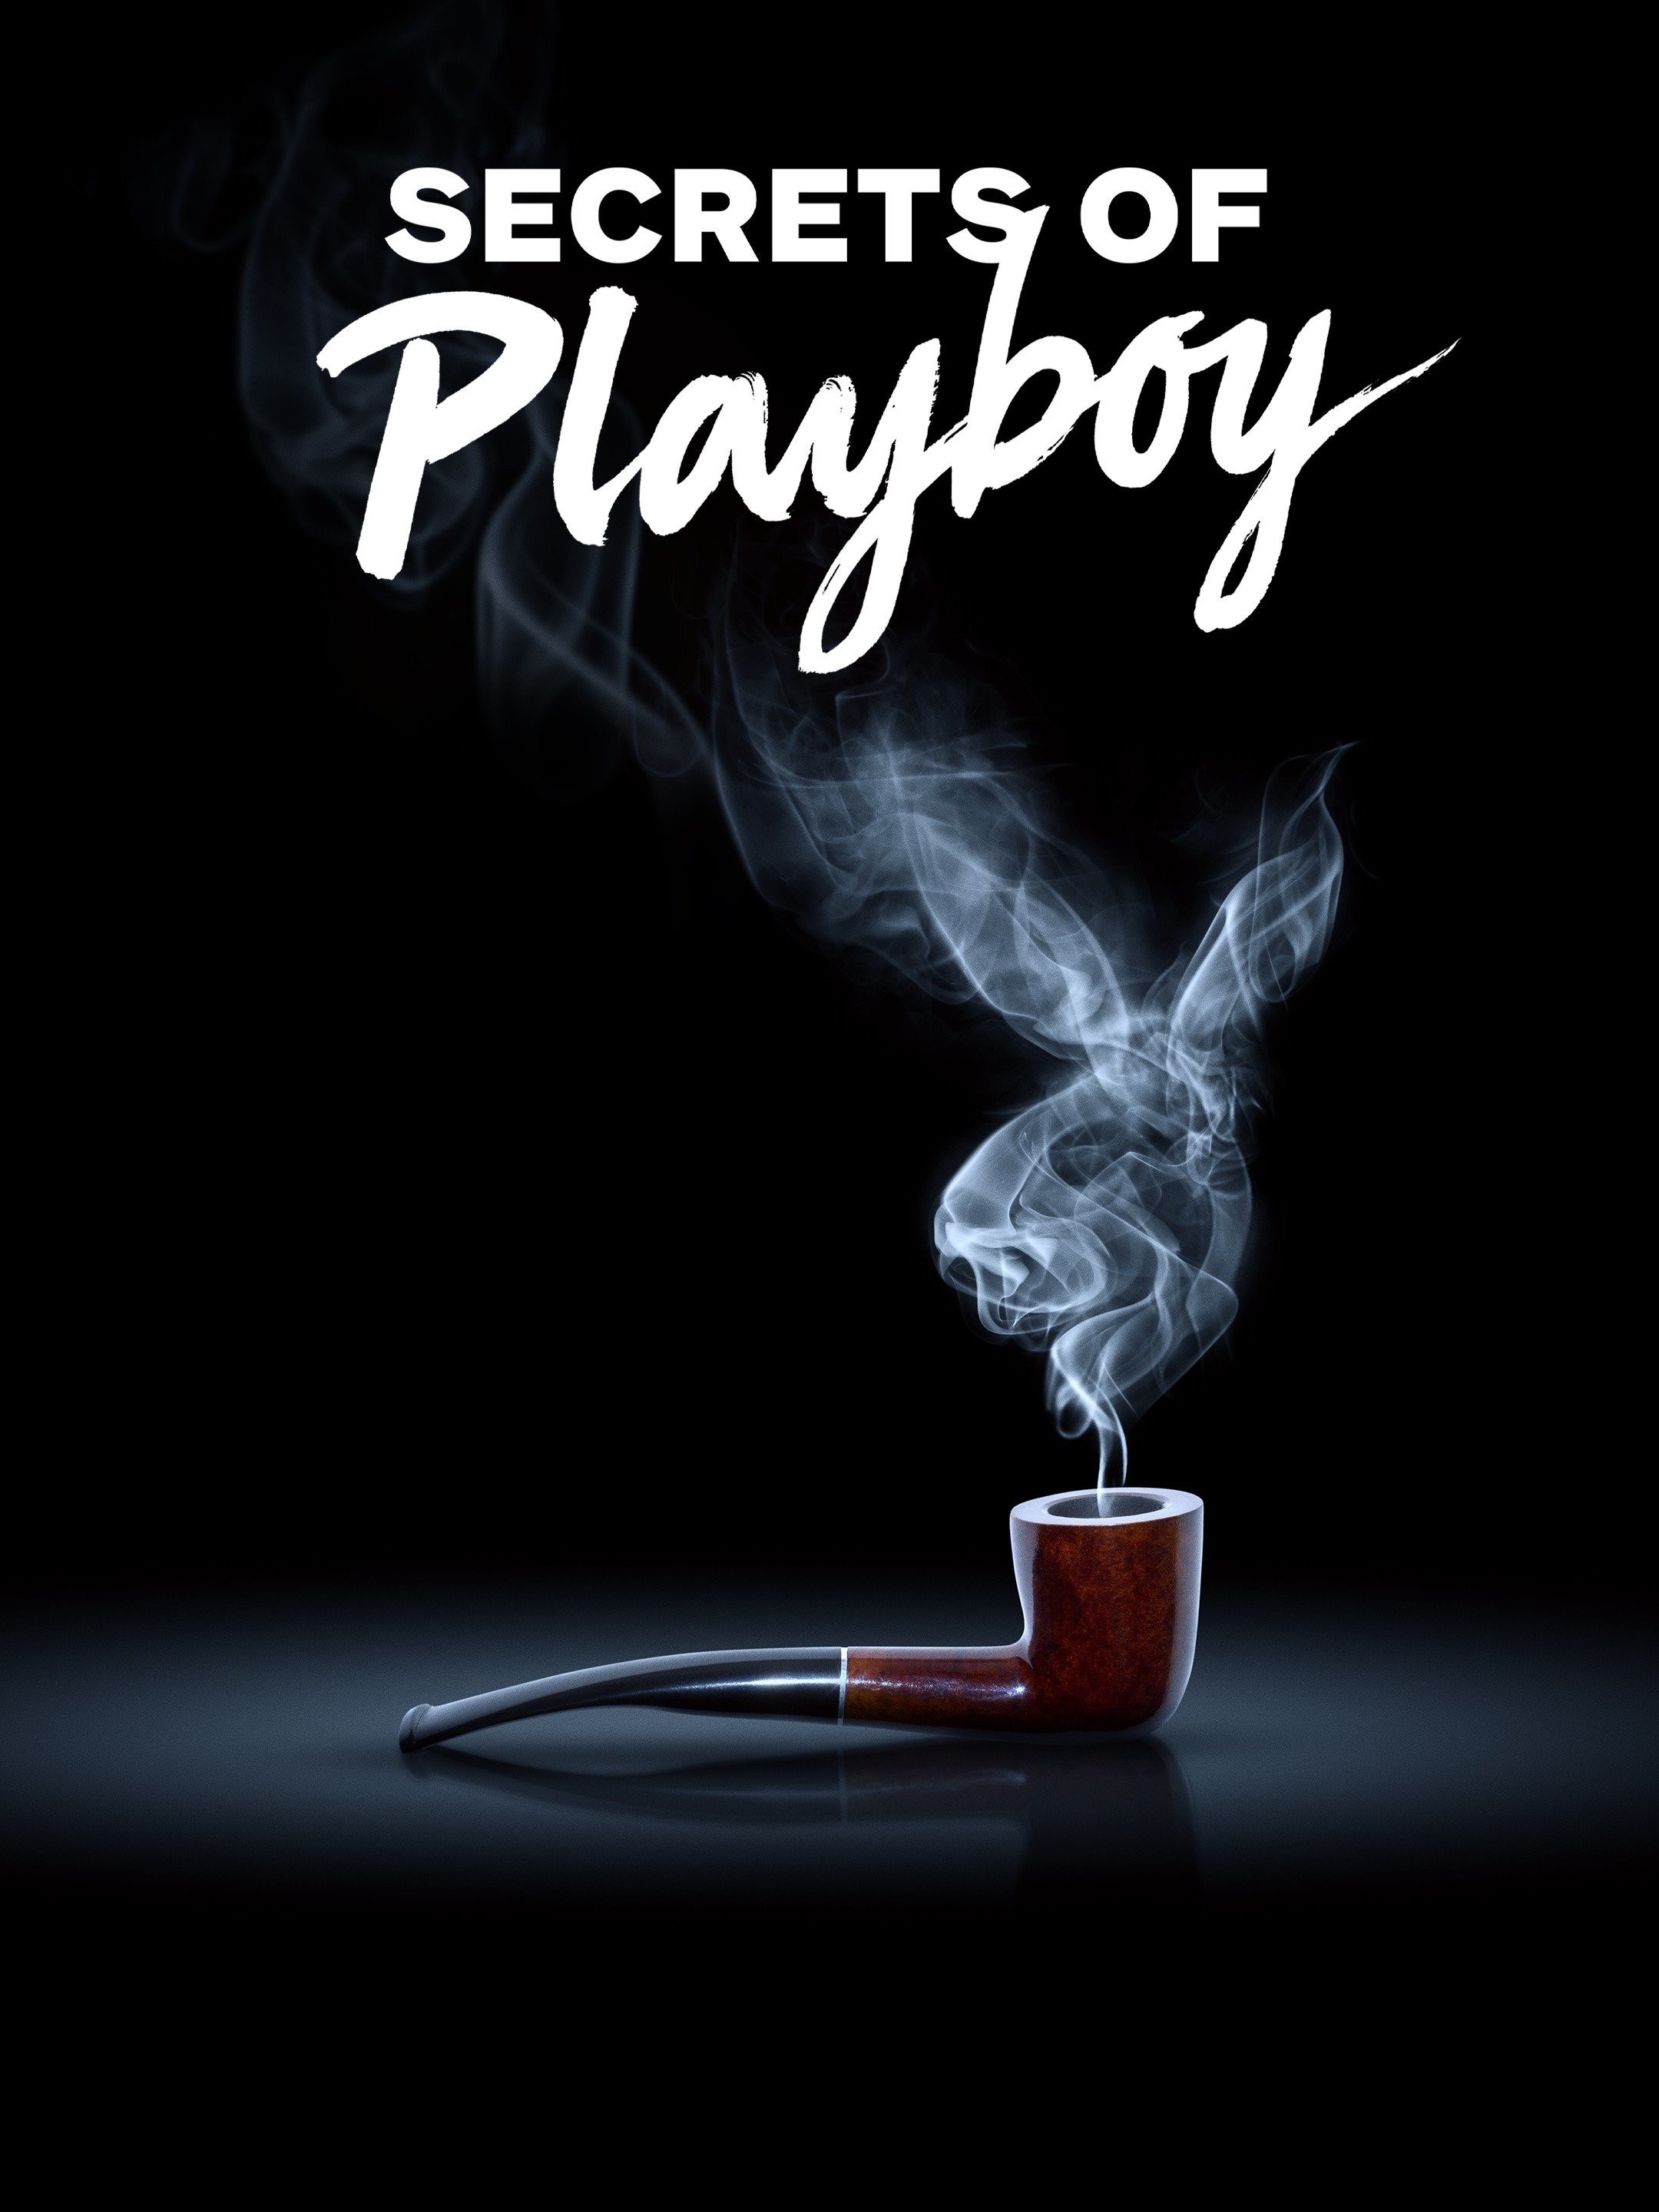 debbie lovelock recommends playboy full movies online pic